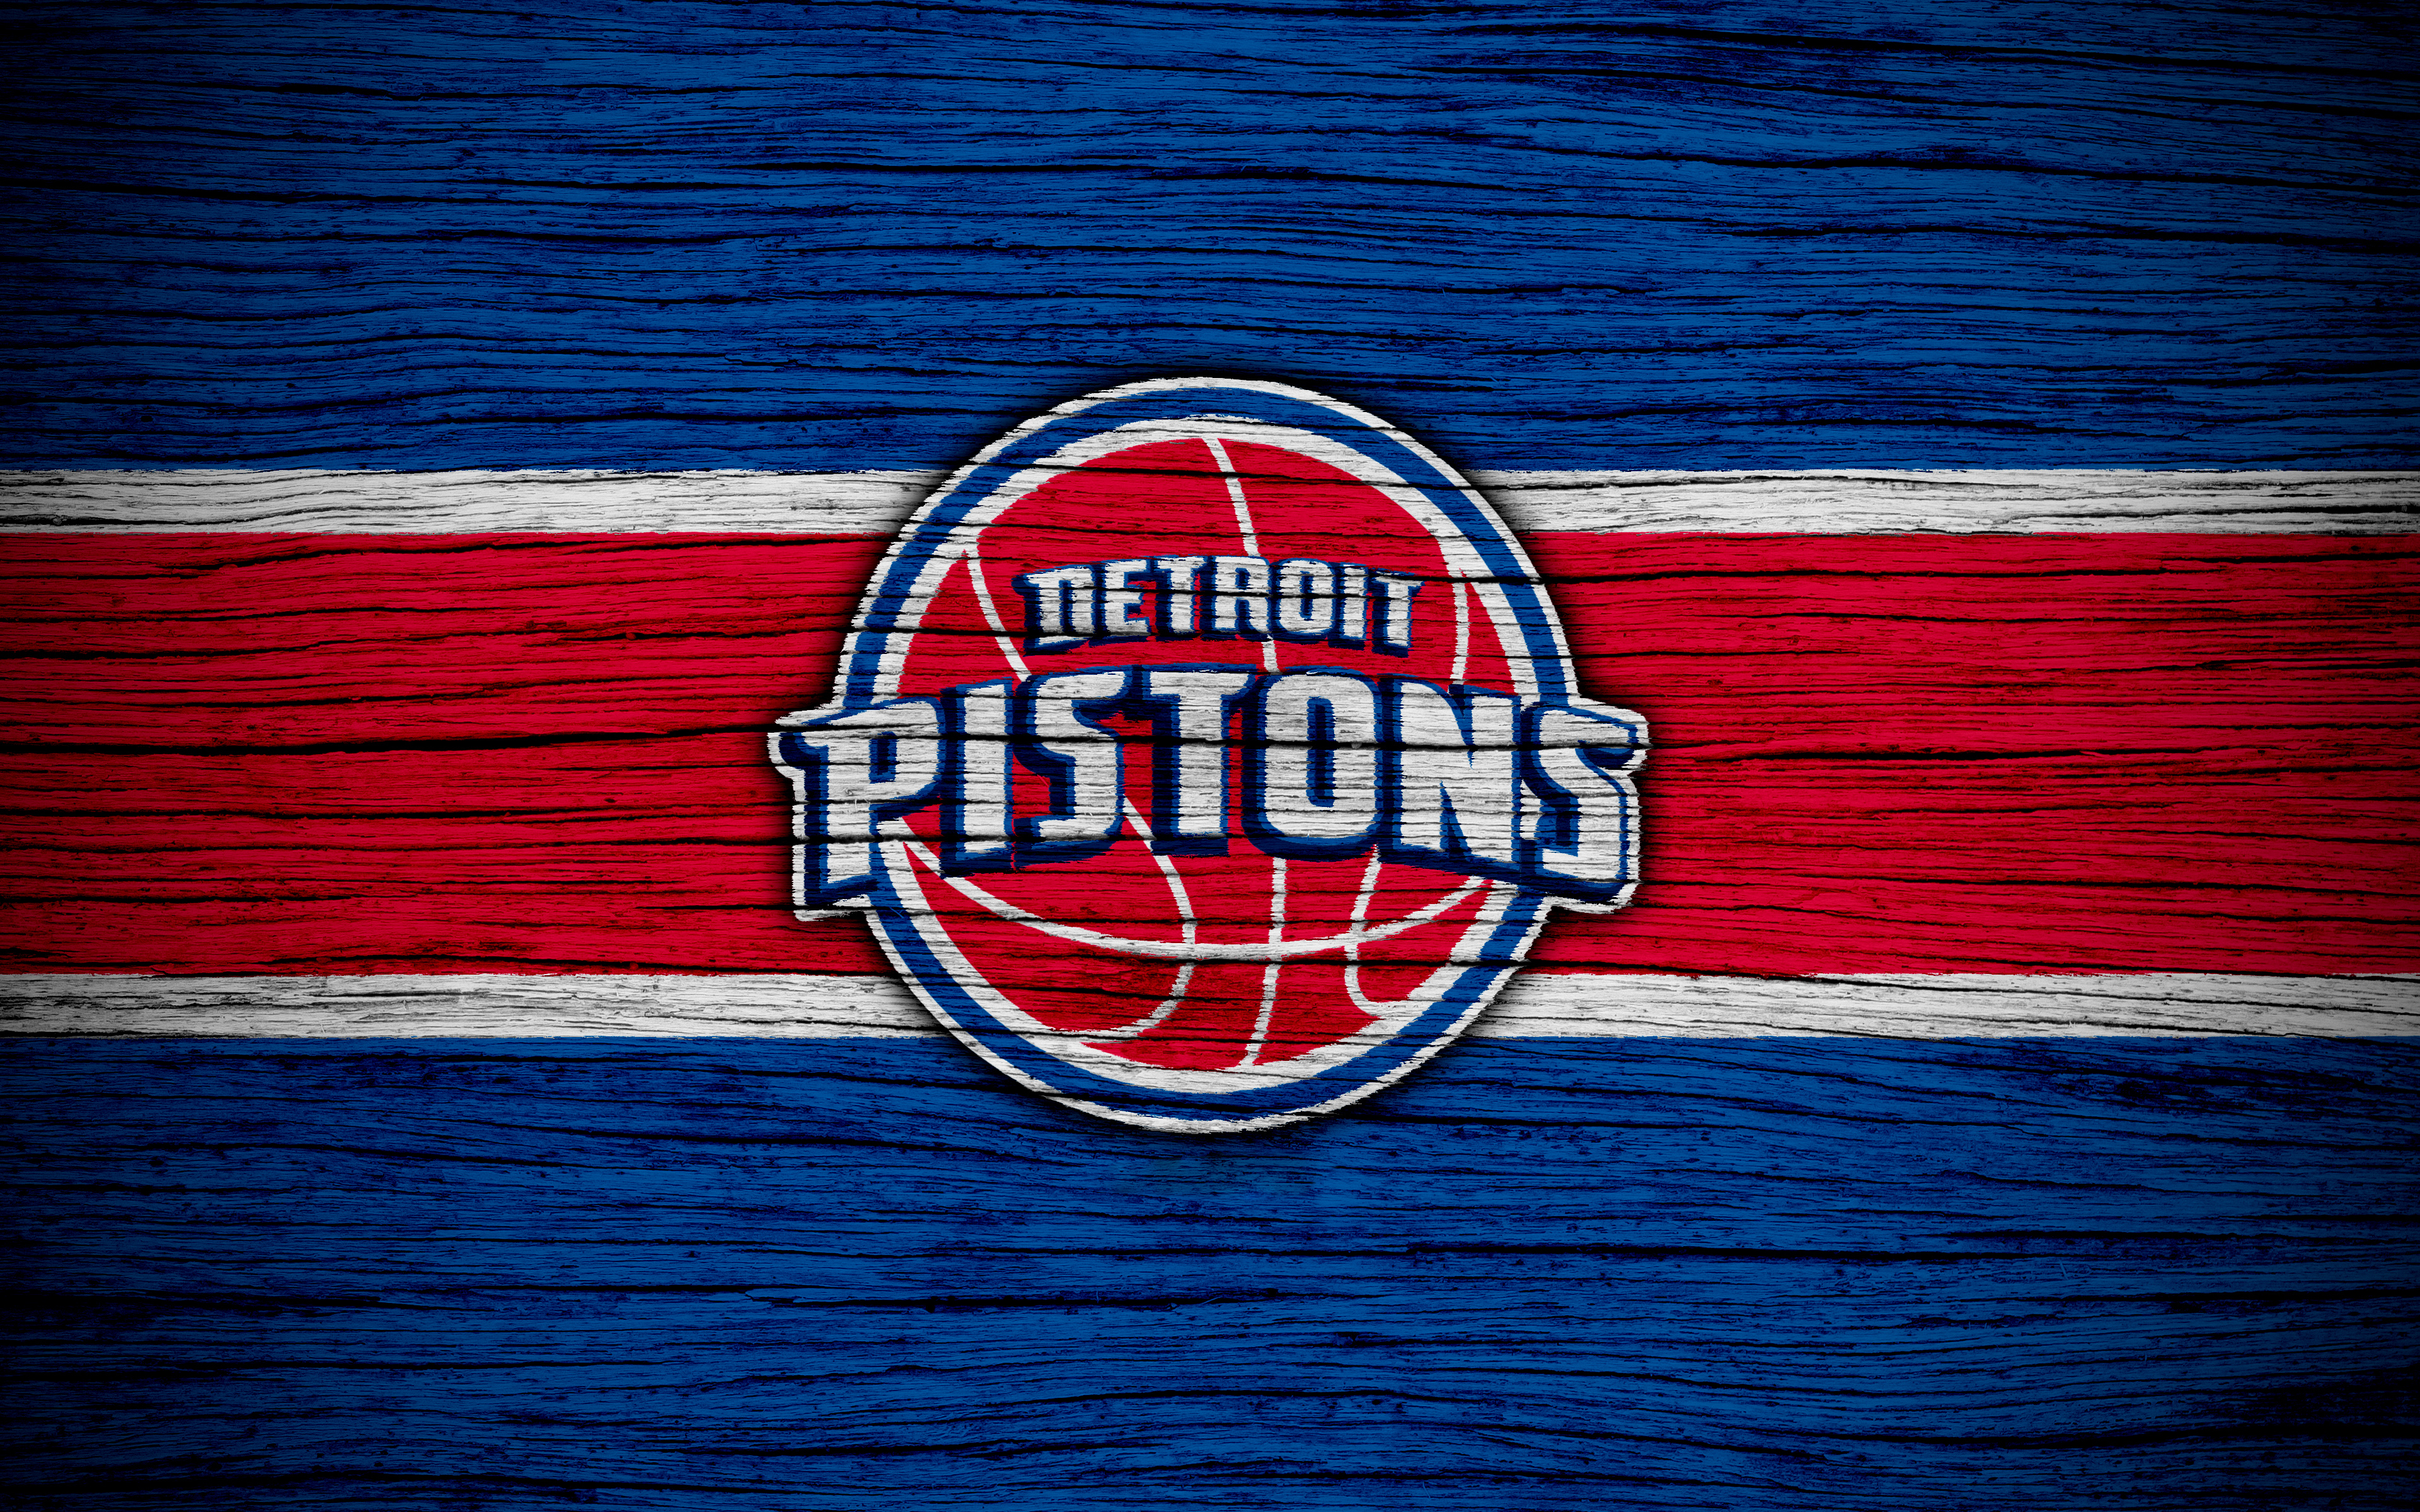 K detroit pistons papers background images